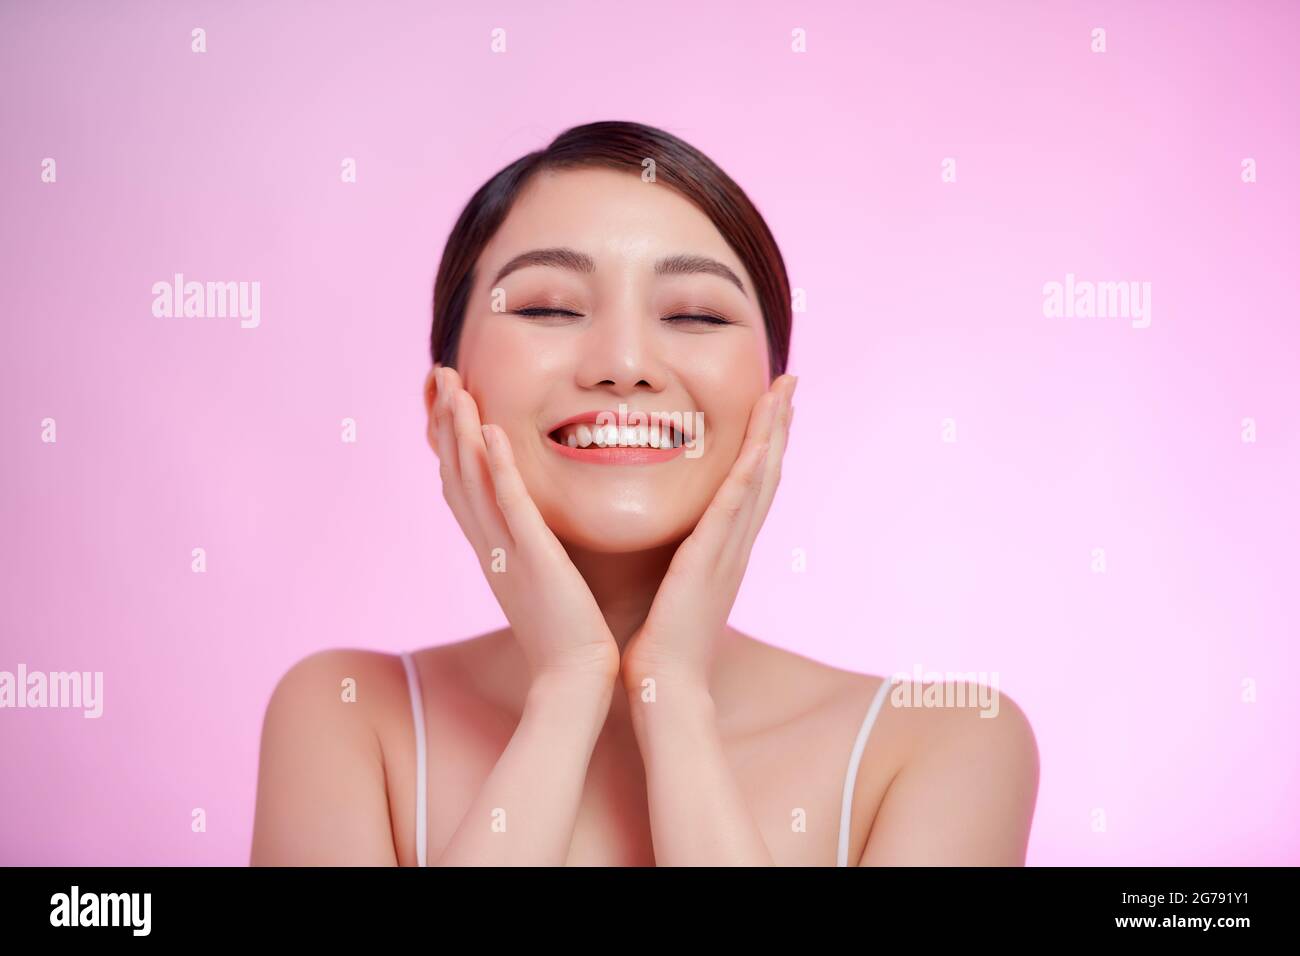 Young Woman Spa Model with Healthy Skin. Facial Treatment, Spa Beauty and Healthcare Concept Stock Photo